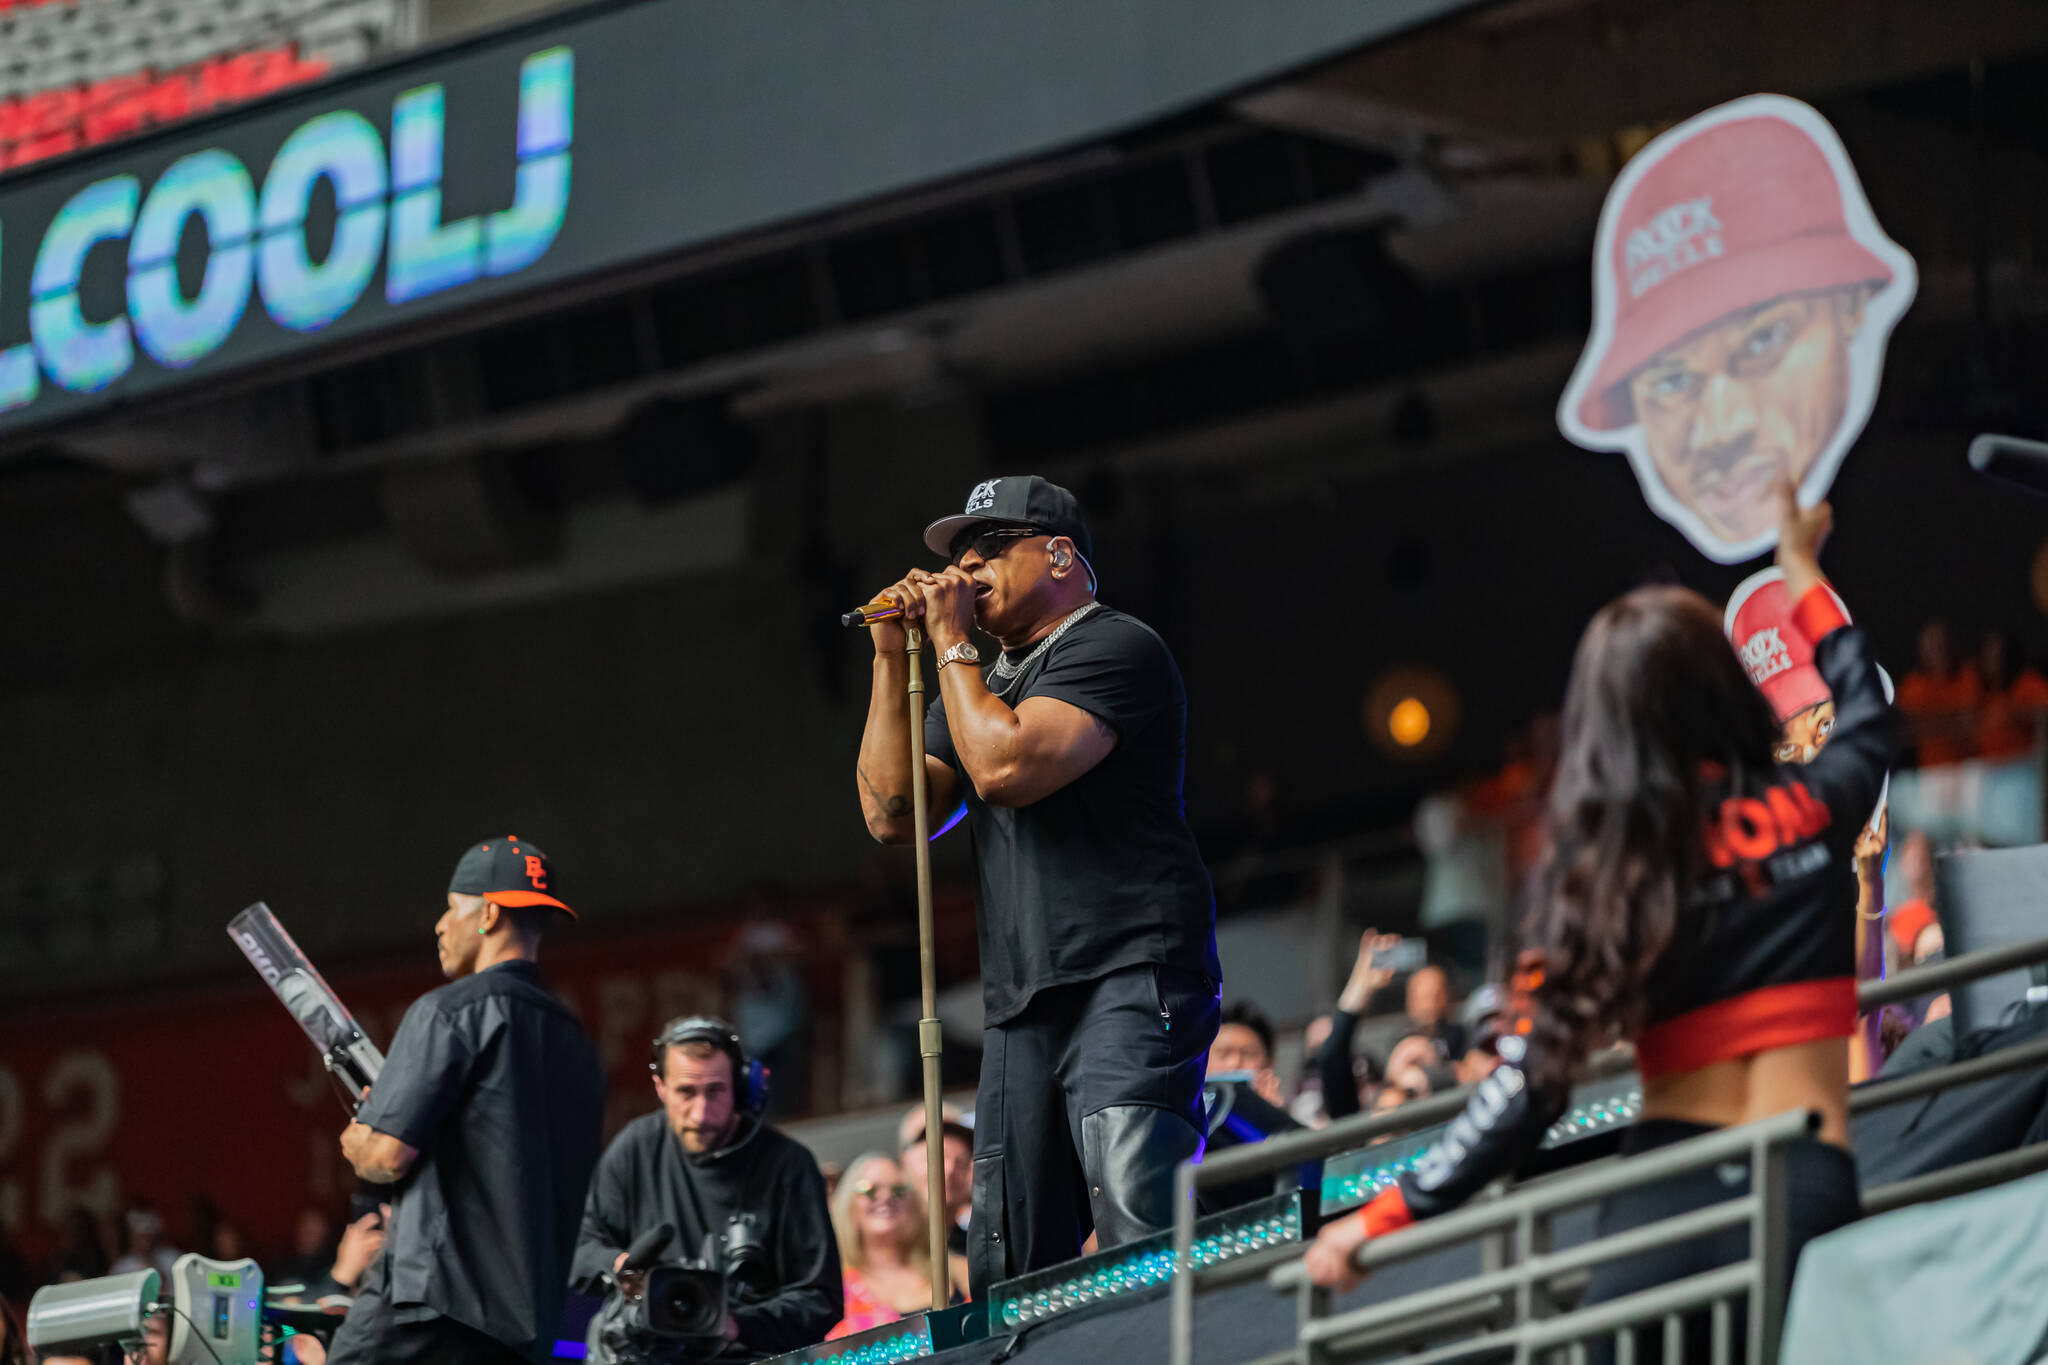 LL Cool entertaining fans prior to Saturday’s B.C. Lions game at BC Place. The Lions would shutout the Edmonton Elks 22-0. (Steven Chang BC Lions photo)